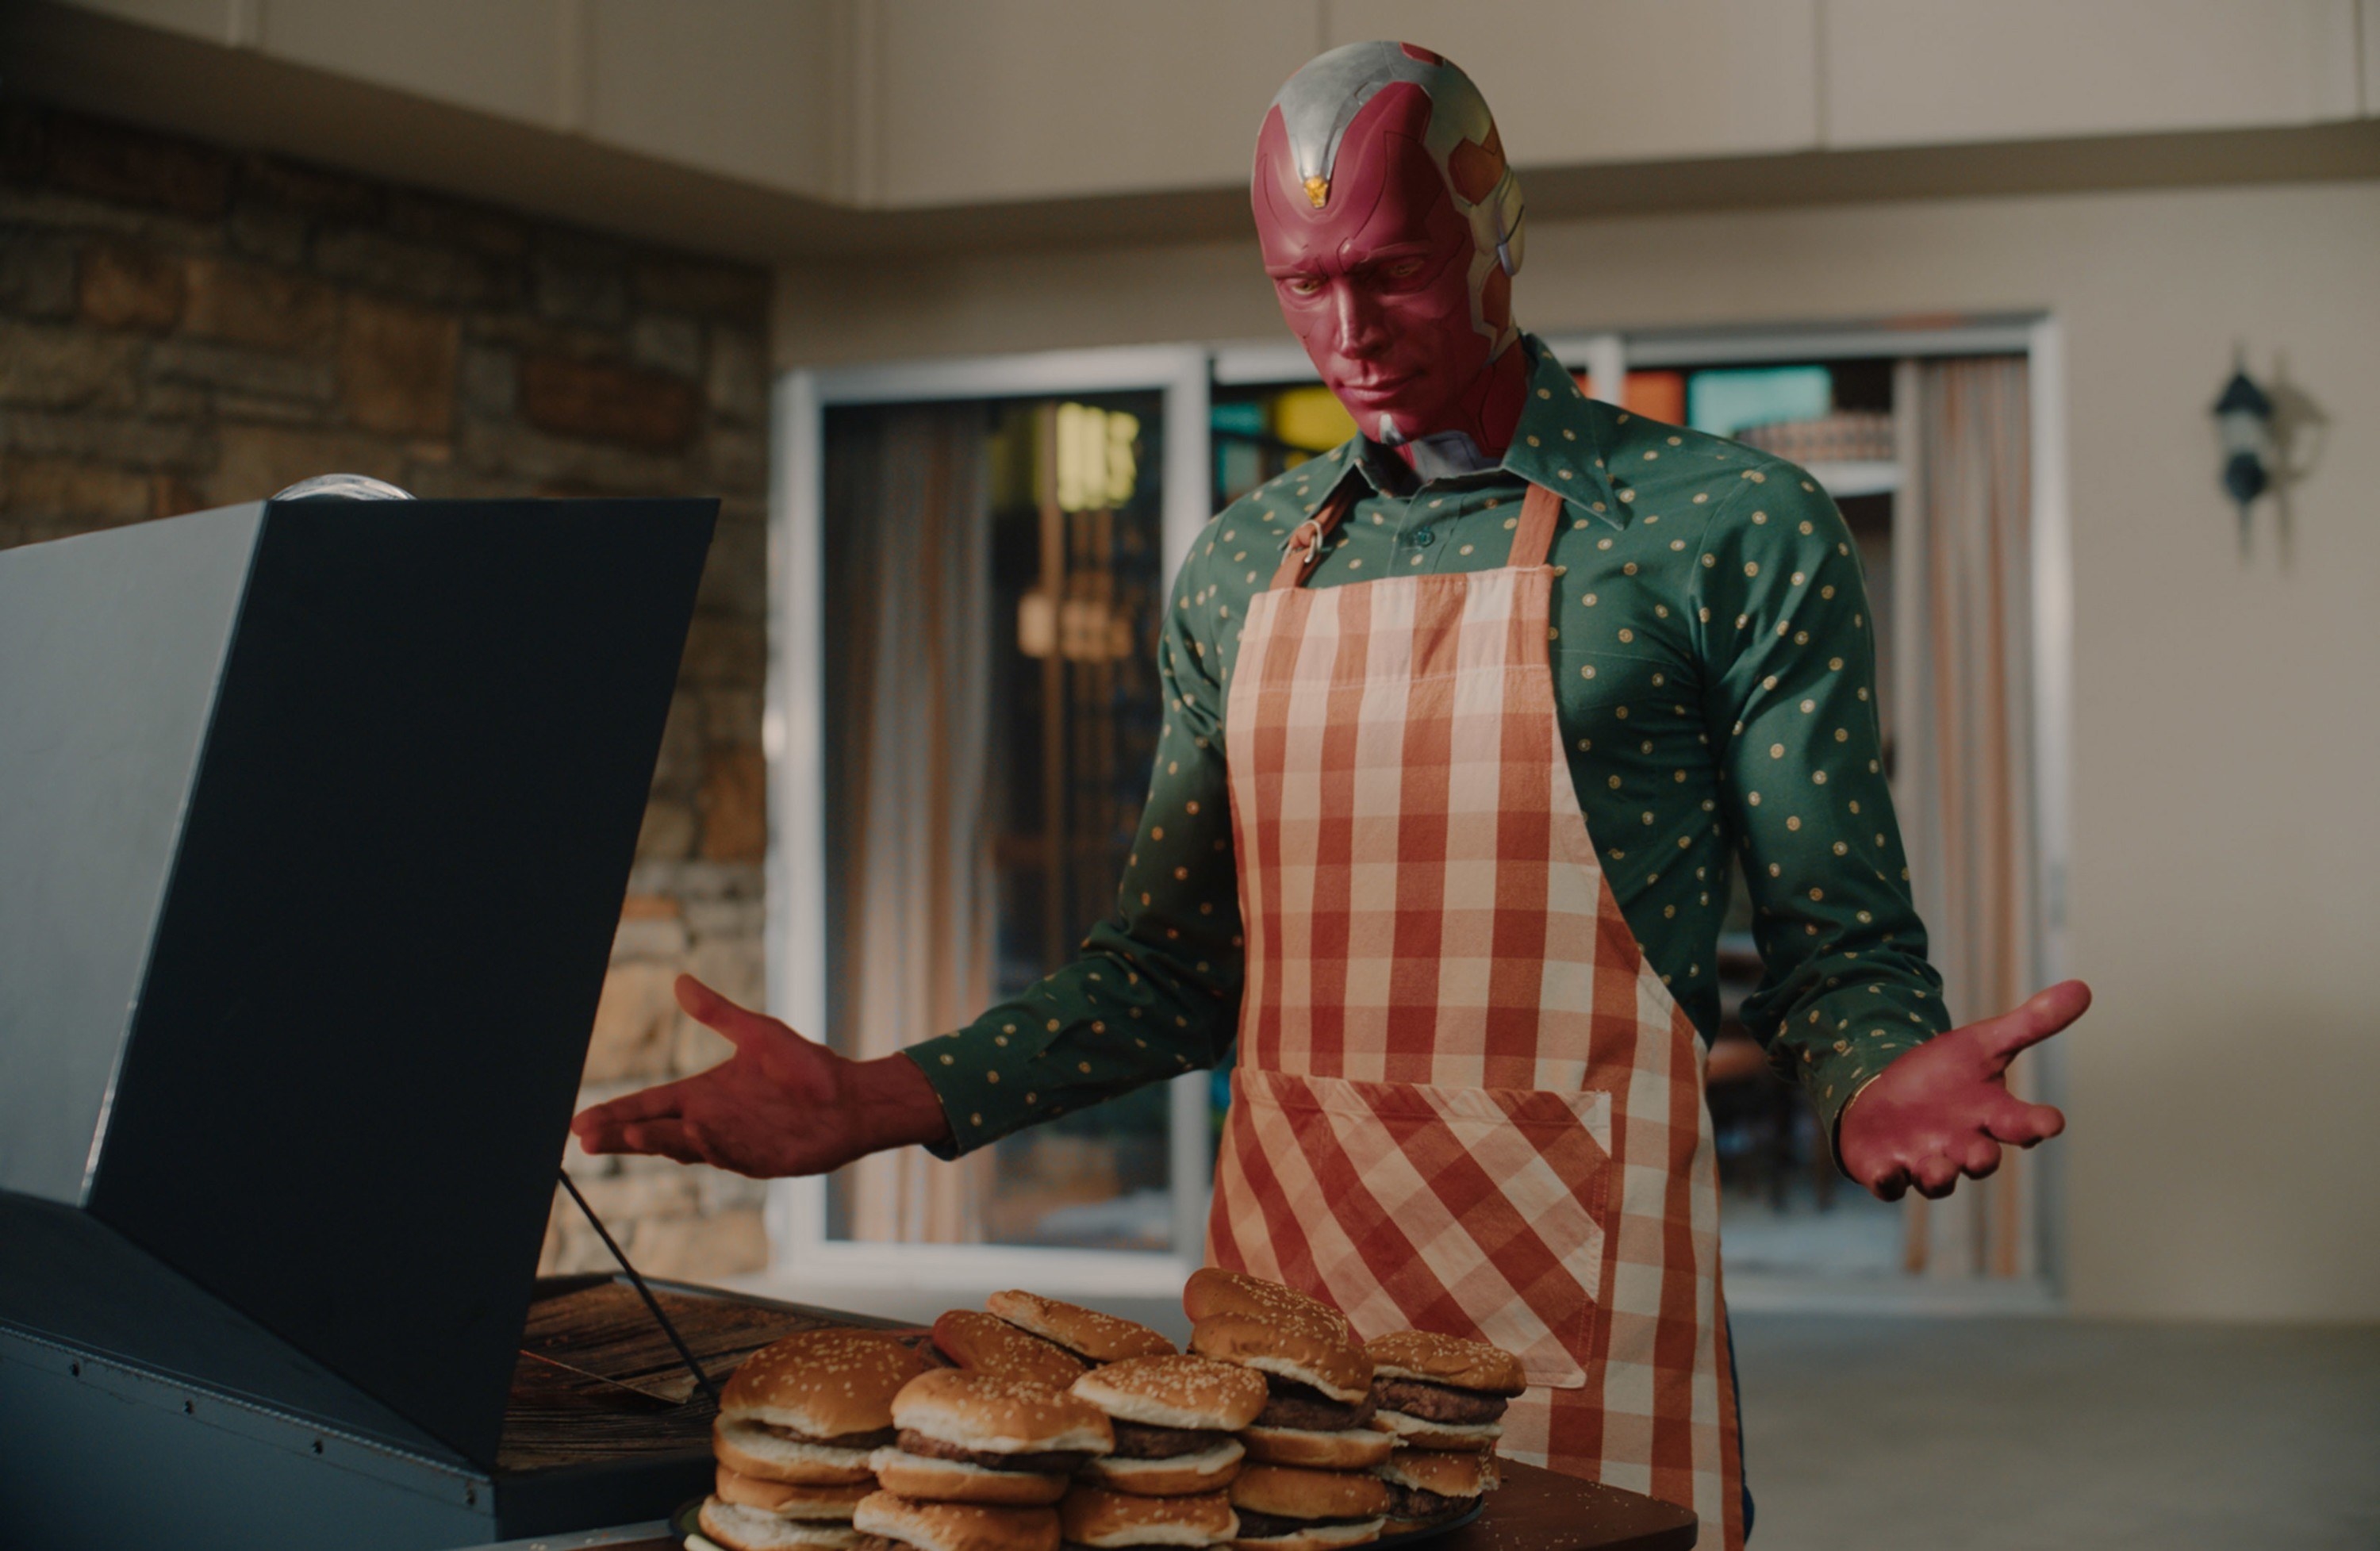 wearing an apron, Vision grills way too many burgers